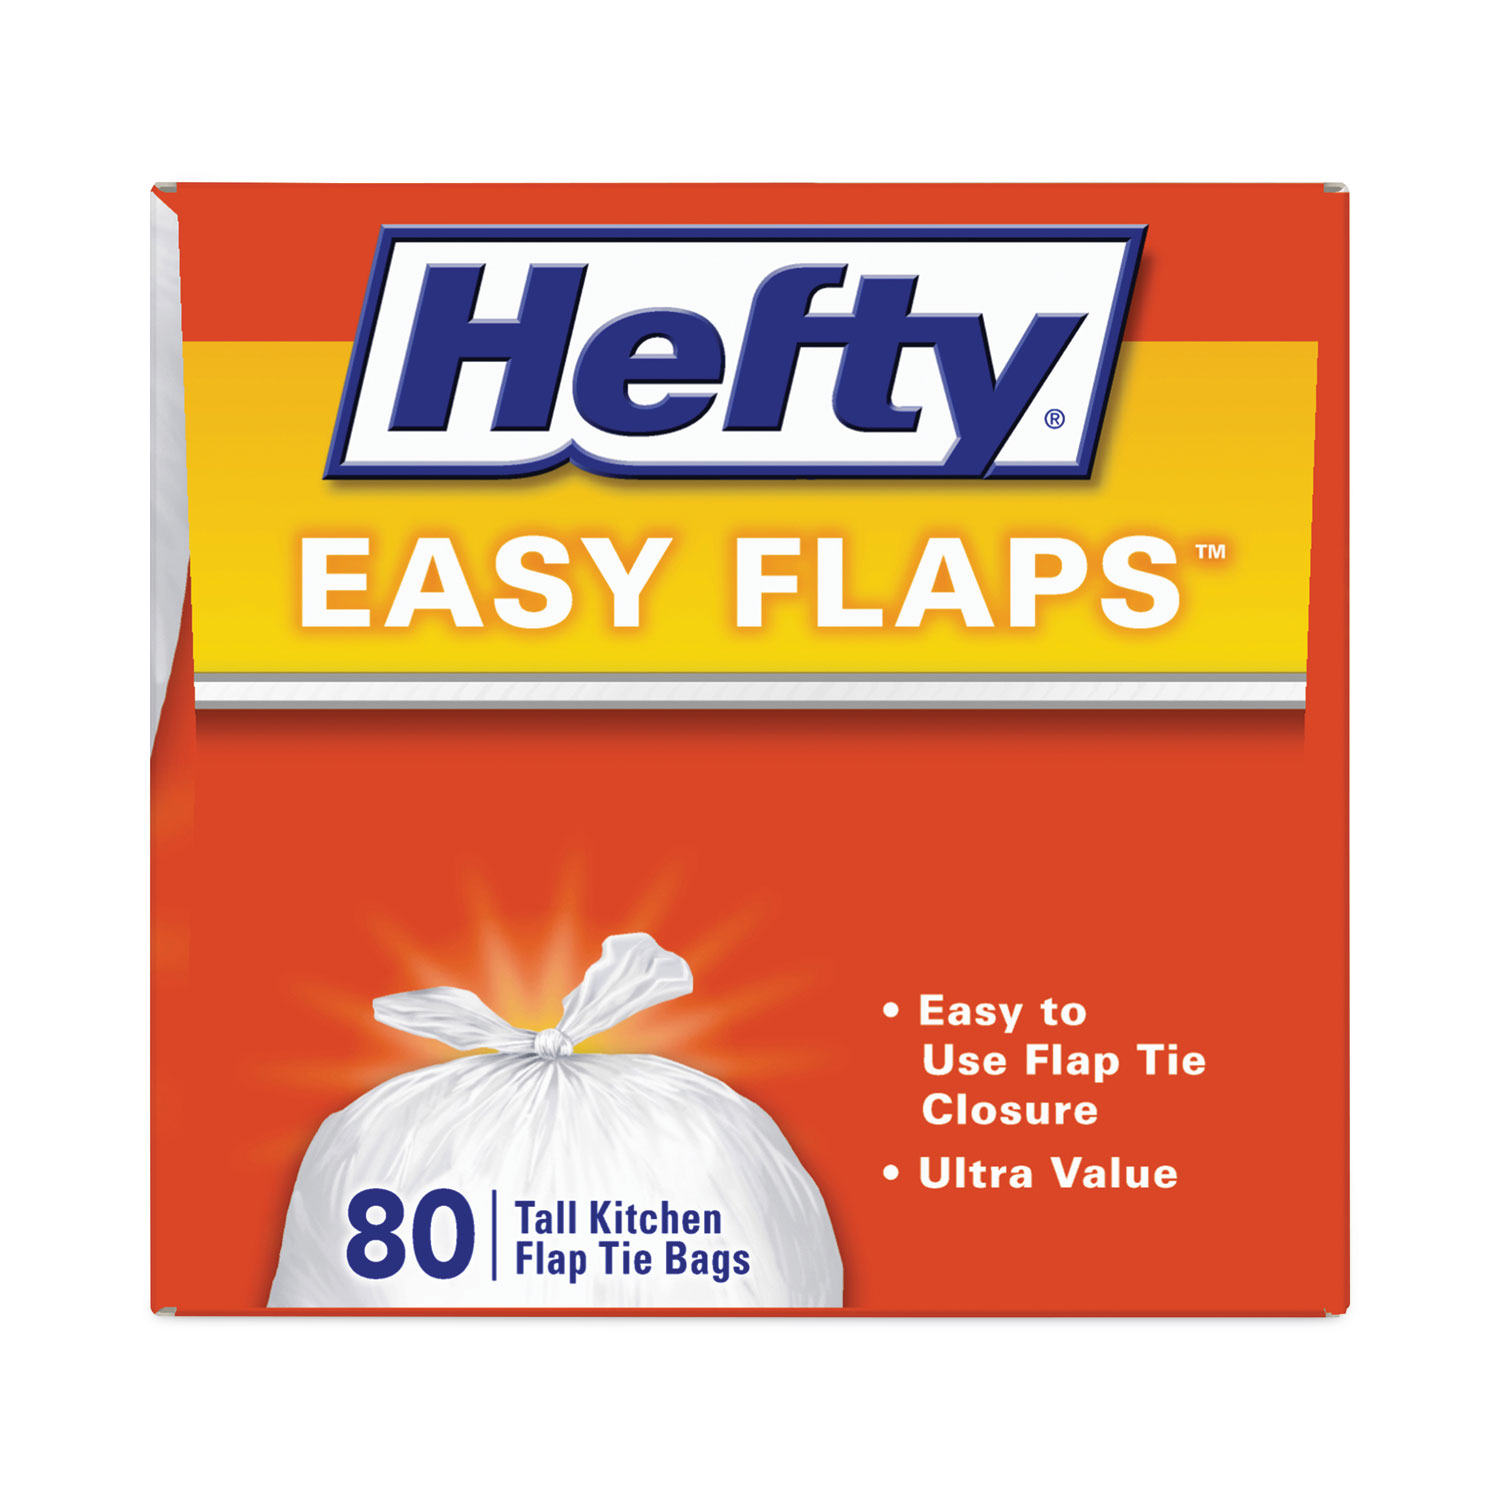 Hefty Ultra Strong Blackout Tall Kitchen Drawstring Trash Bags, Scent Free, 13  Gallon, 40 Count